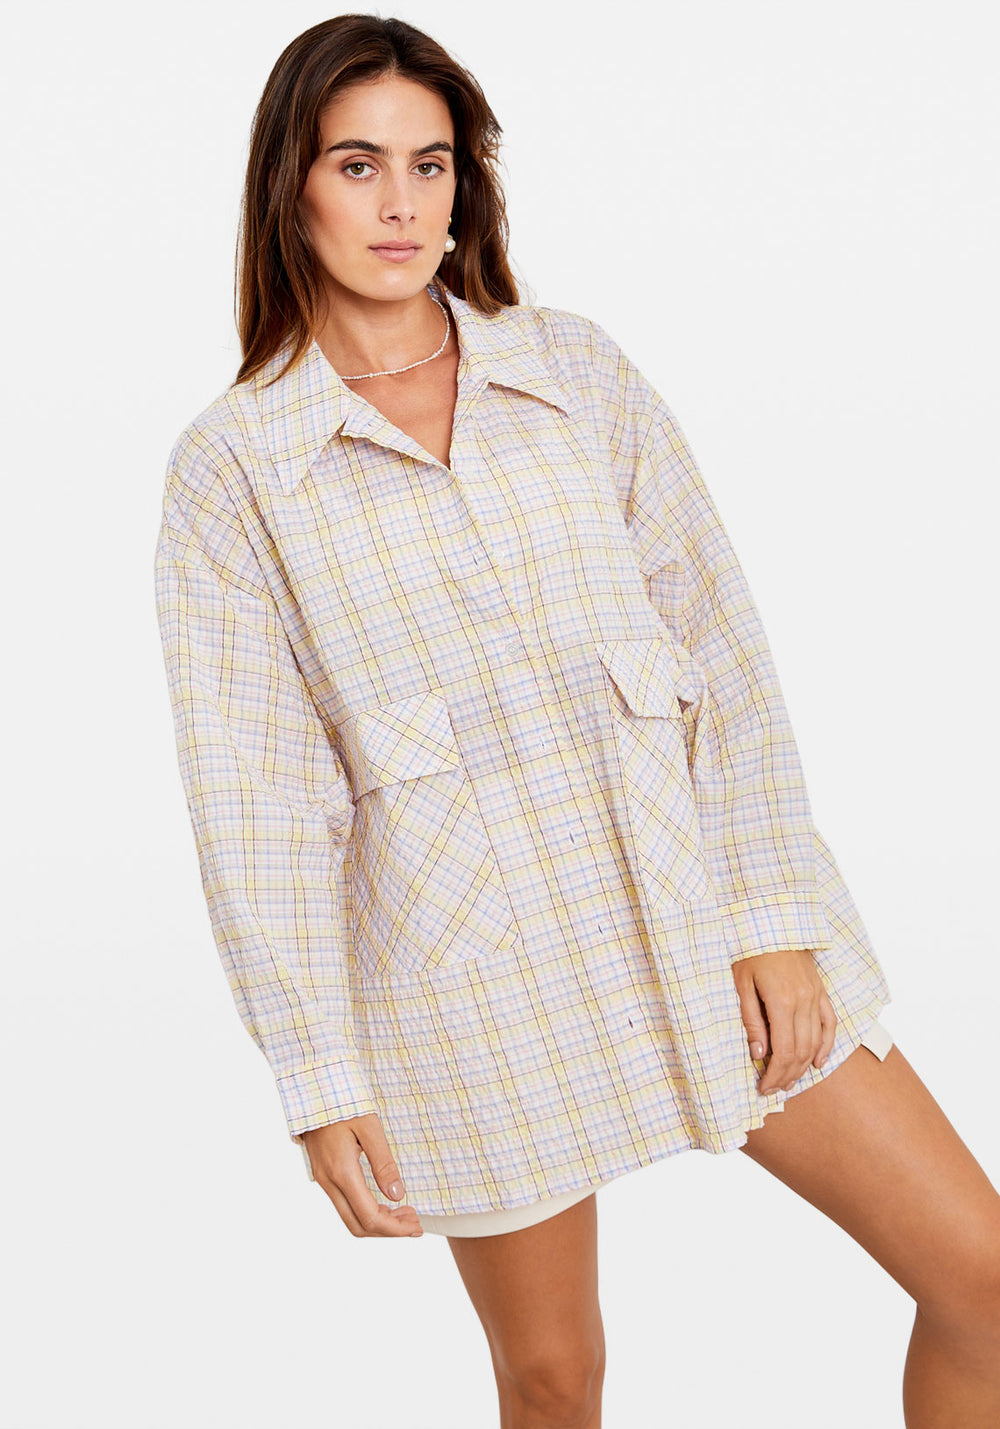 KNOX SQUARED TOP YELLOW GINGHAM